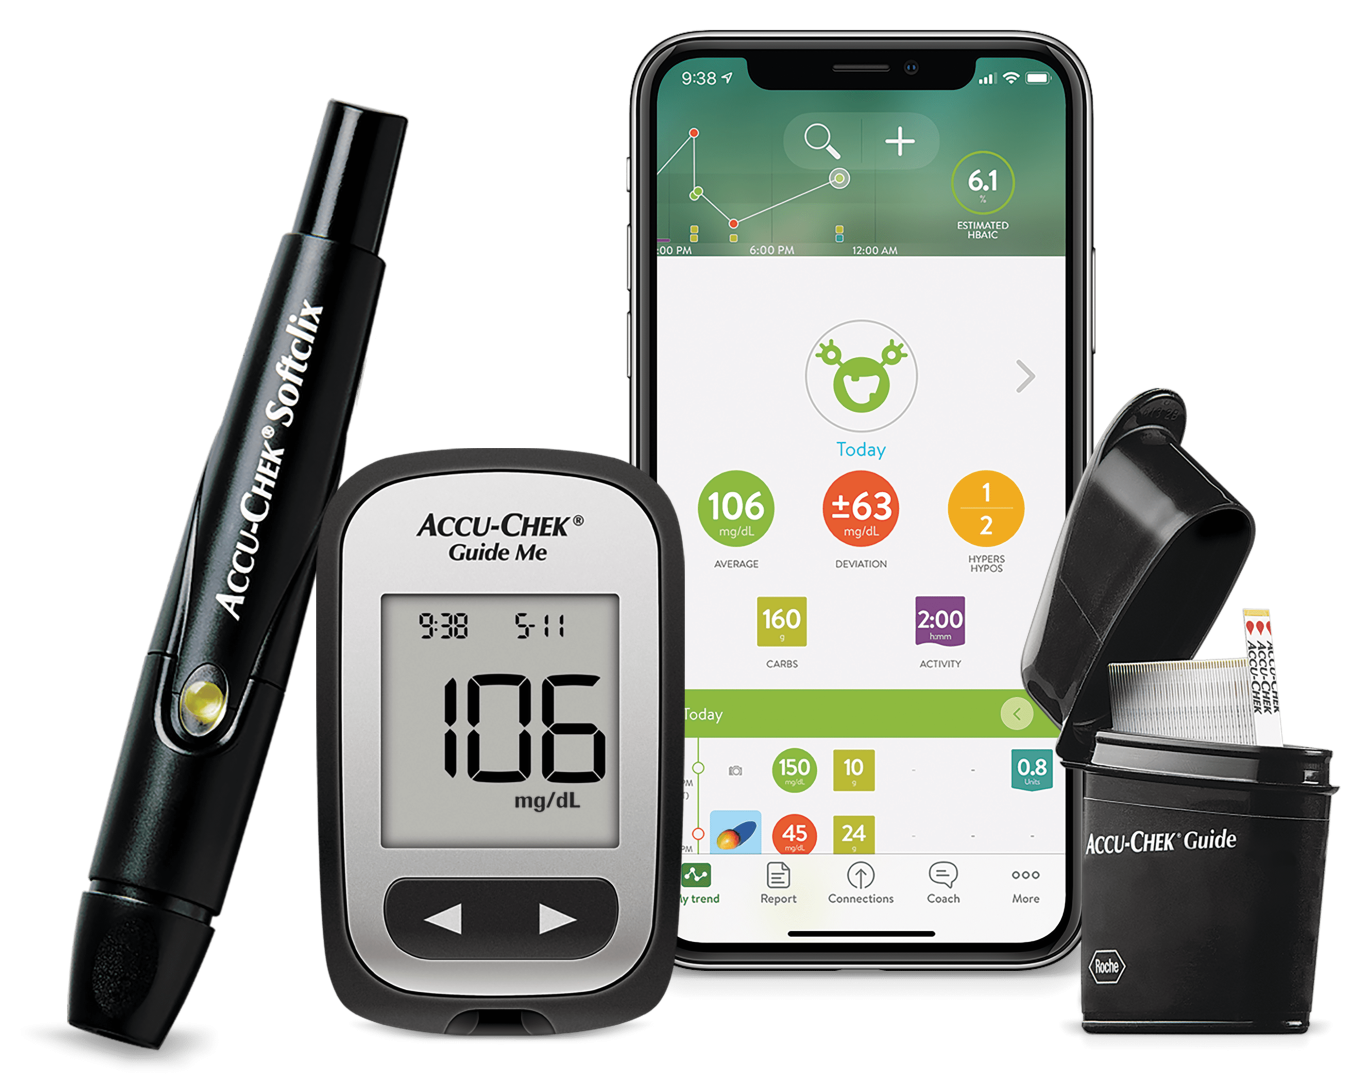 Grouping of Accu-Chek® Blood Glucose products (Accu-Chek Softclix, Accu-Chek Guide Me blood glucose meter, iPhone with mySugr app, and Accu-Chek Guide test strips)